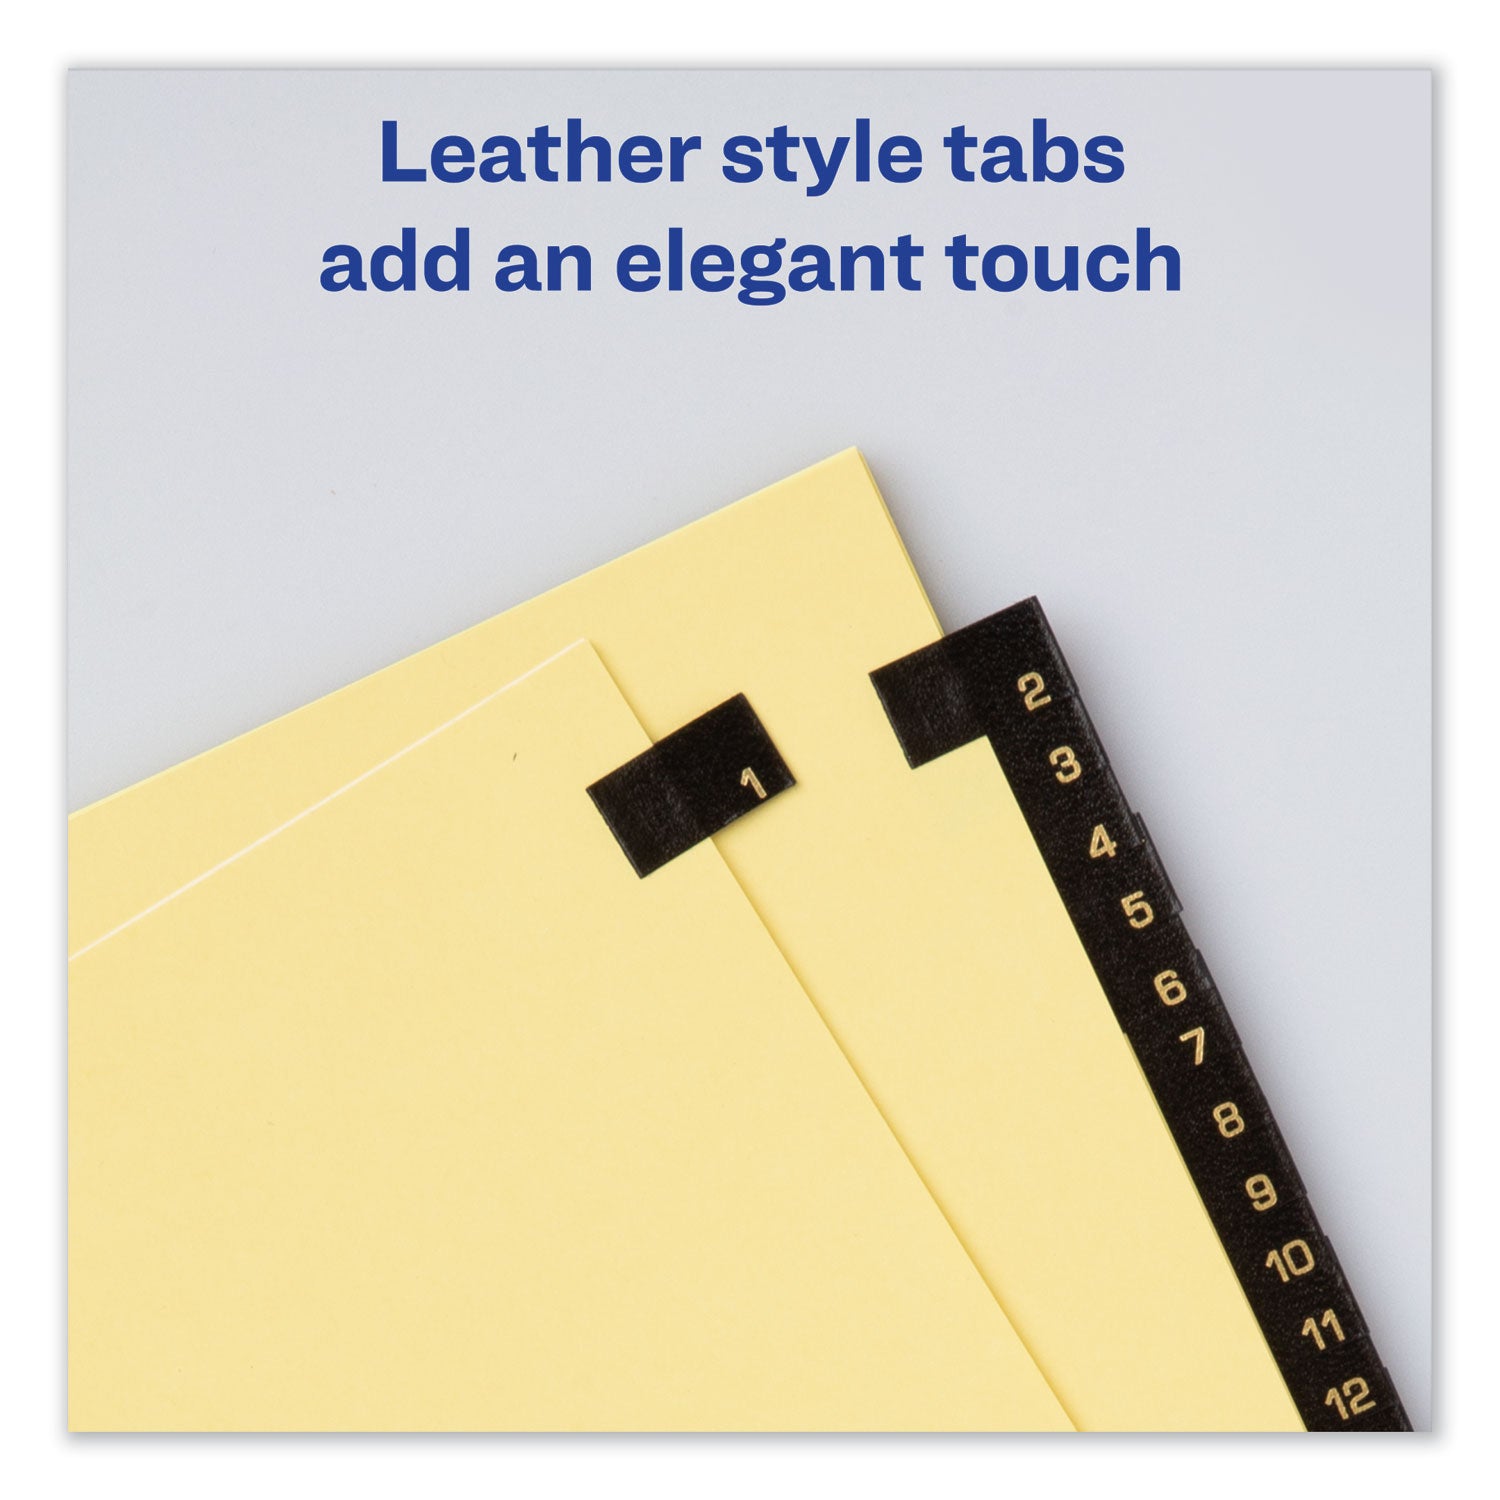 Preprinted Black Leather Tab Dividers w/Gold Reinforced Edge, 31-Tab, 1 to 31, 11 x 8.5, Buff, 1 Set - 